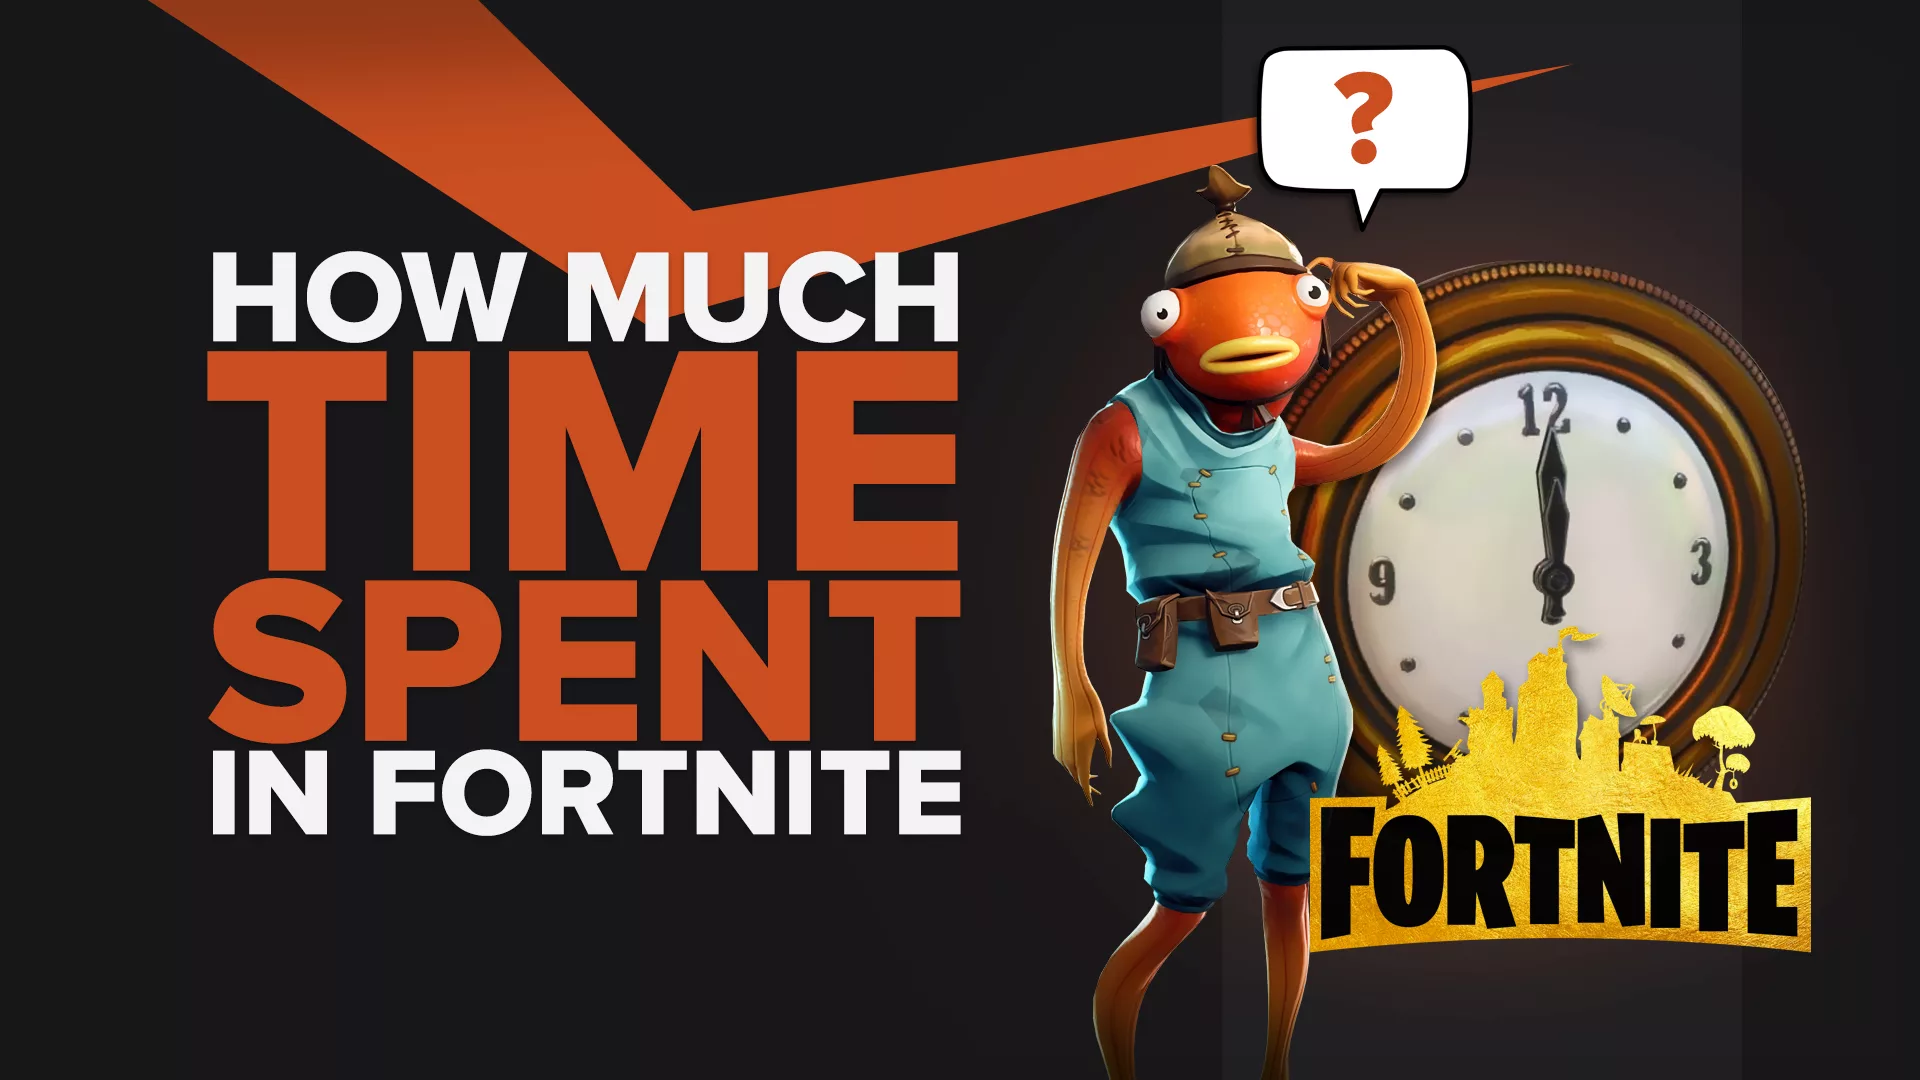 How Much Time did I Spent In Fortnite